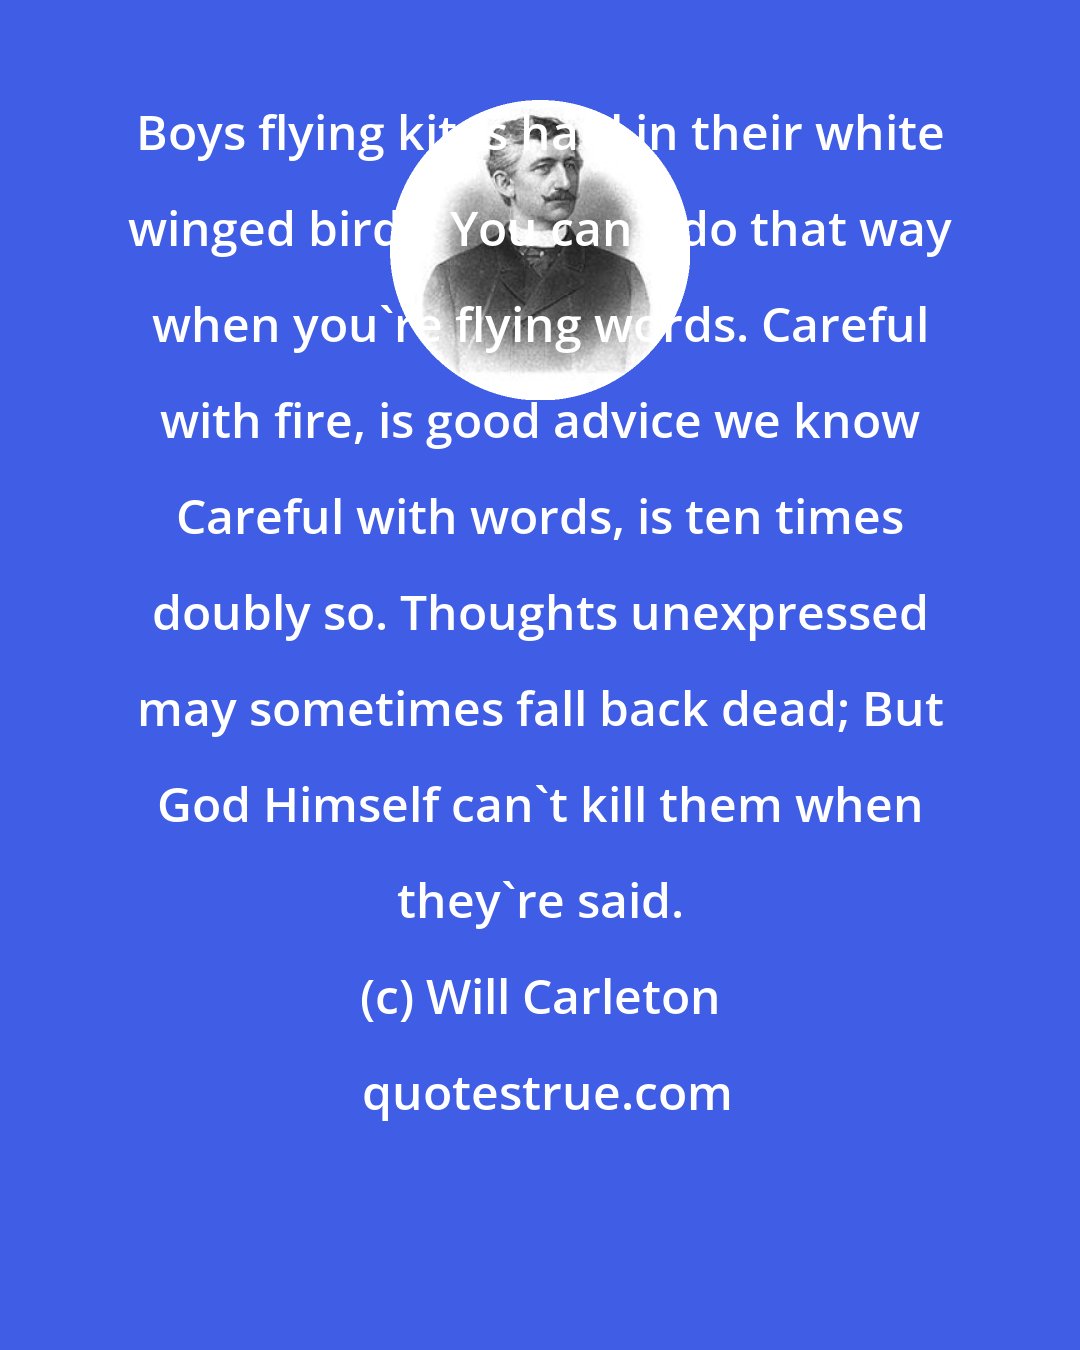 Will Carleton: Boys flying kites haul in their white winged birds; You can't do that way when you're flying words. Careful with fire, is good advice we know Careful with words, is ten times doubly so. Thoughts unexpressed may sometimes fall back dead; But God Himself can't kill them when they're said.